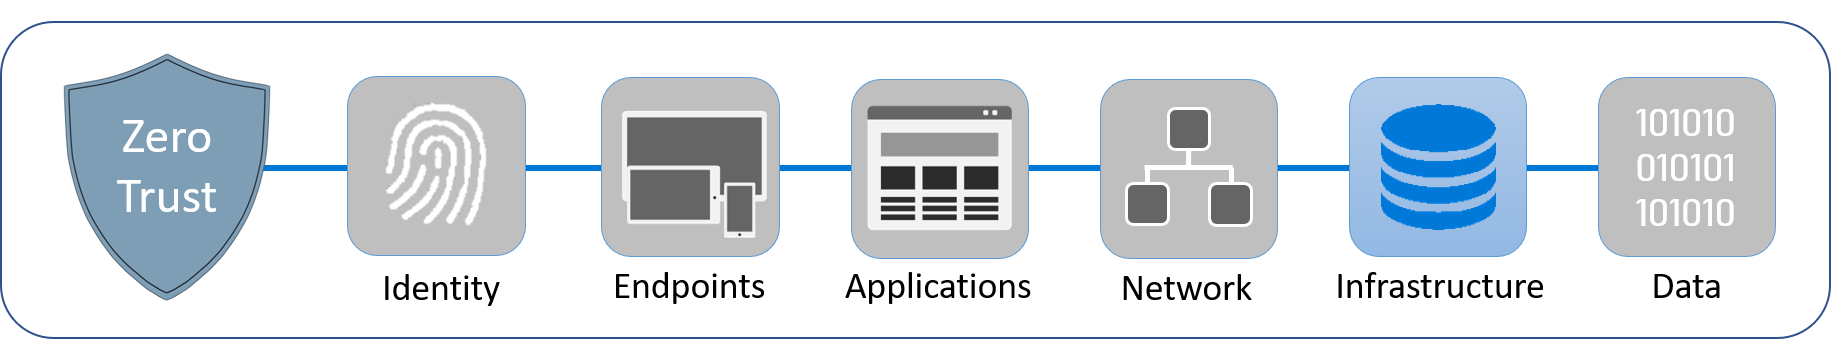 Diagram showing the six pillars that comprise Zero Trust: identity, endpoints, applications, networks, infrastructure and data. Infrastructure is highlighted.